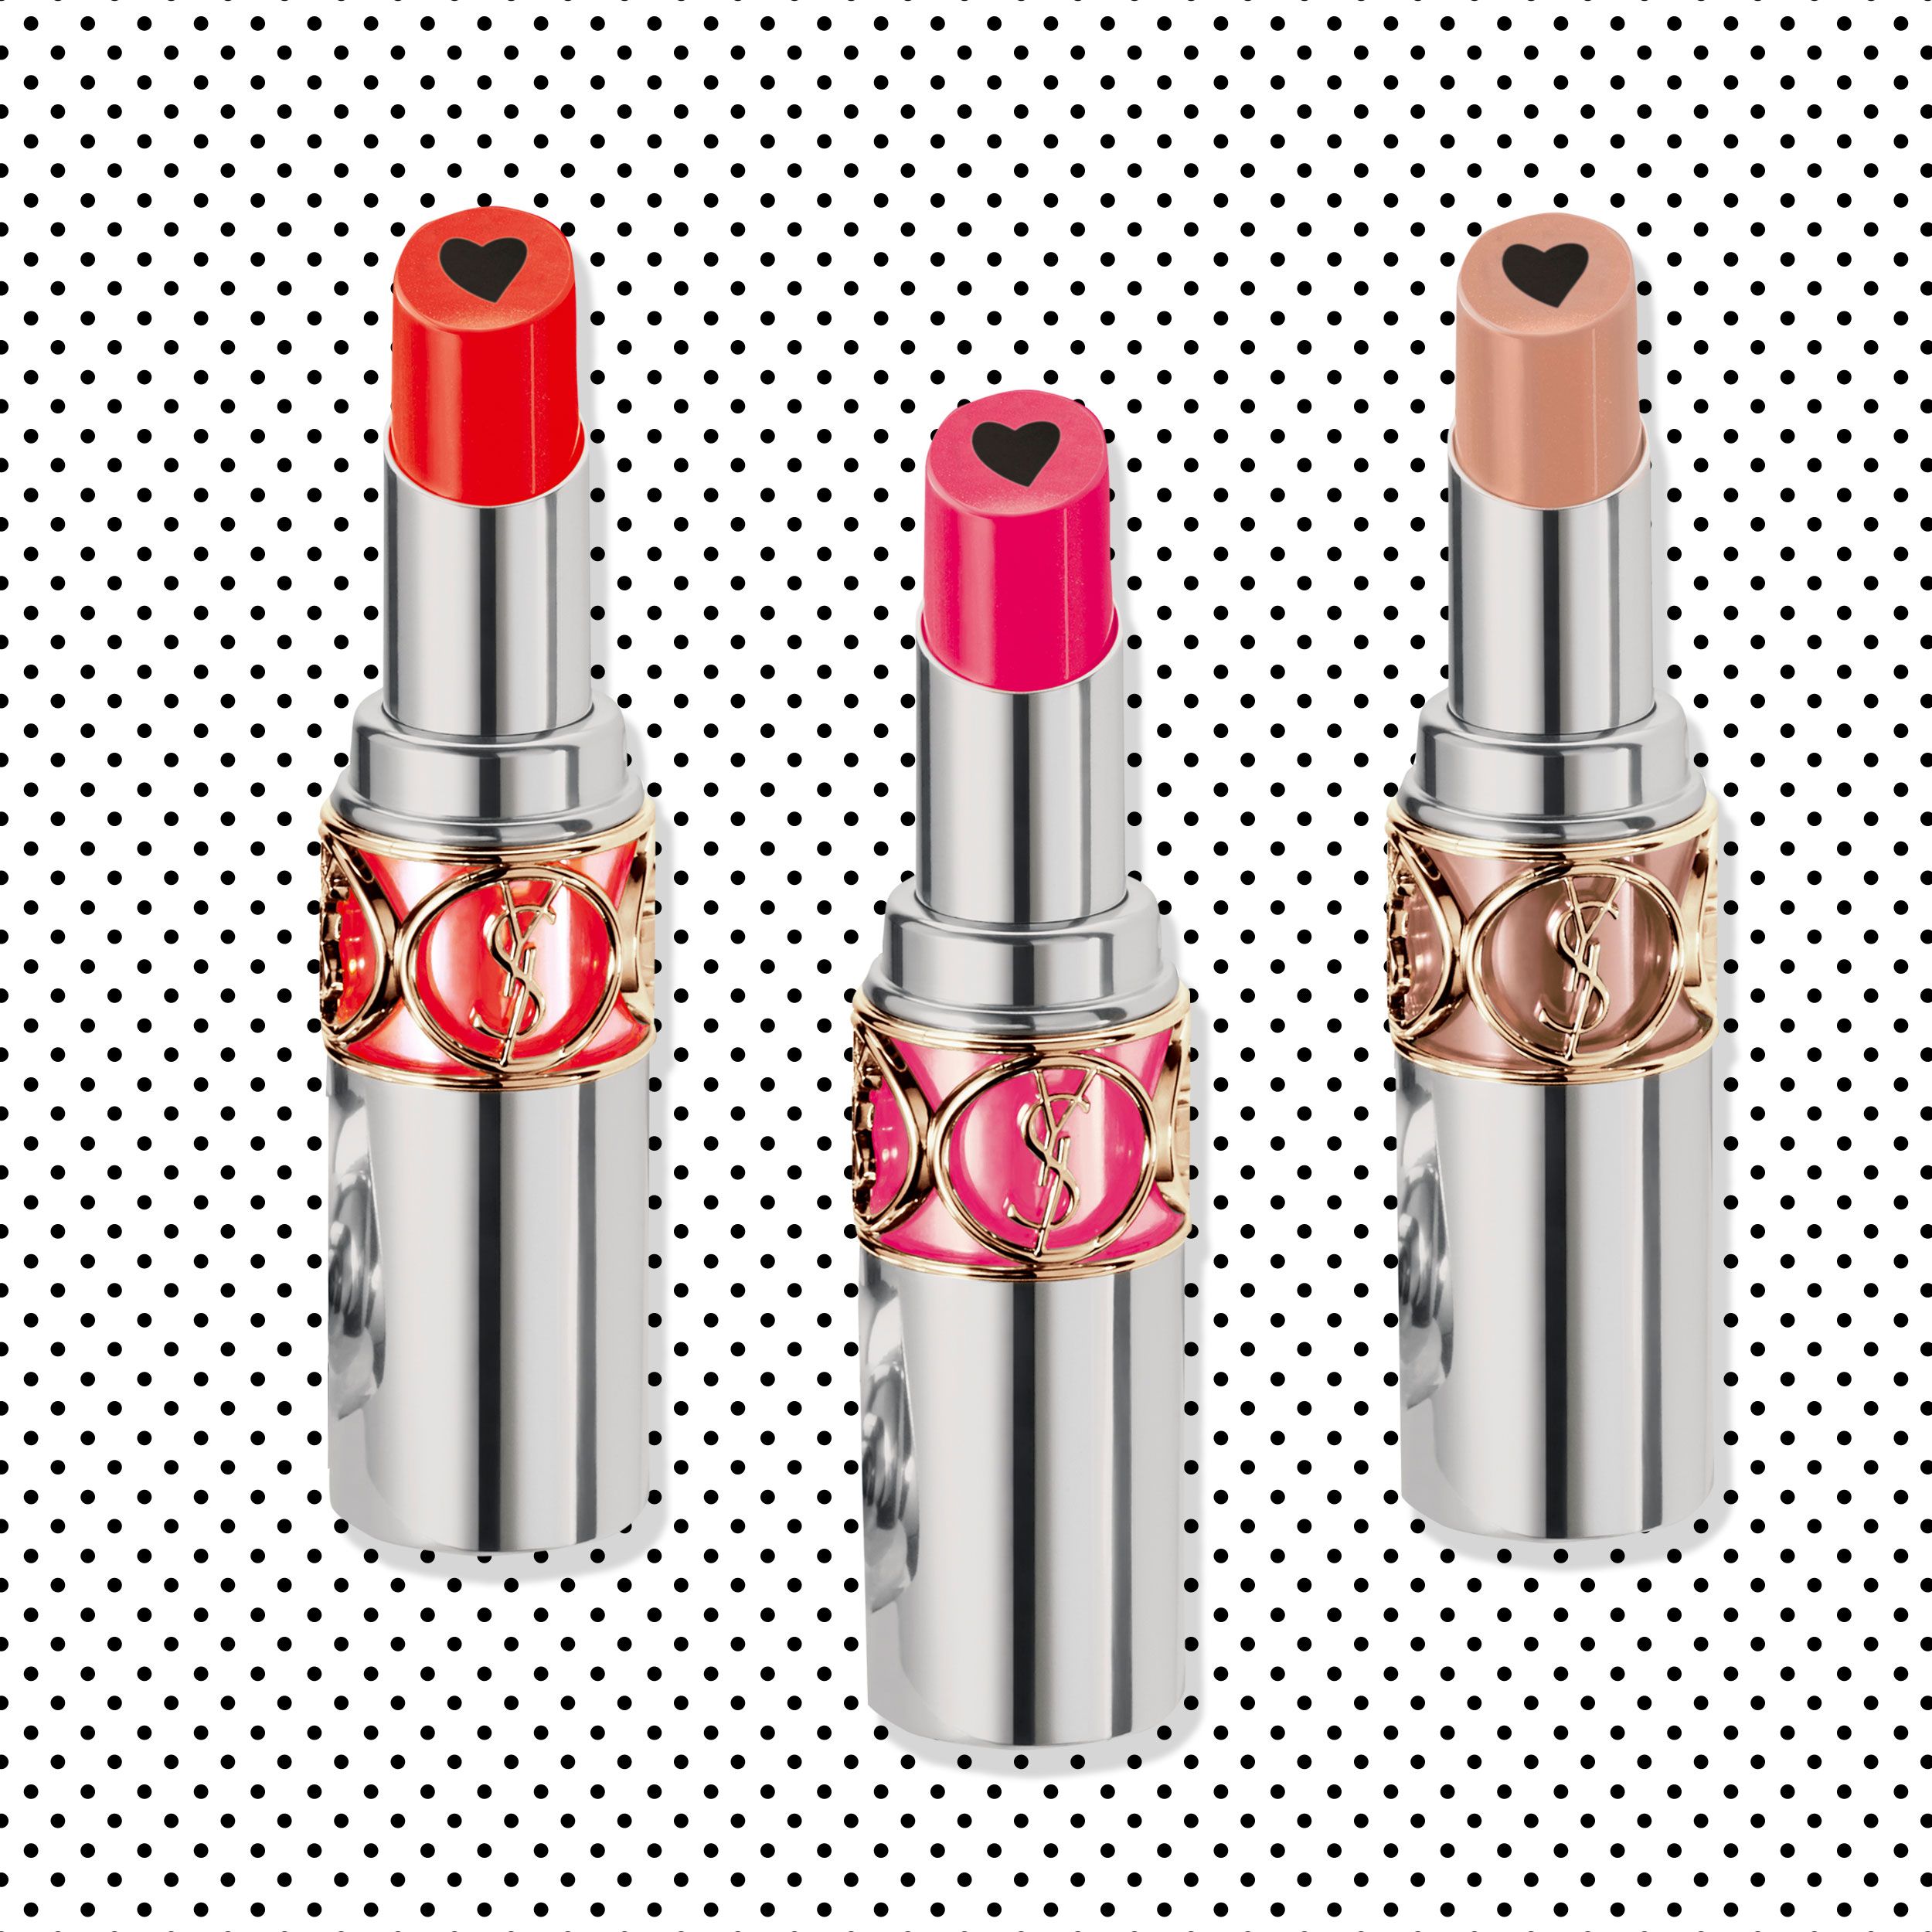 YSL Beaute Releases Plumping Lipstick in Six New Shades